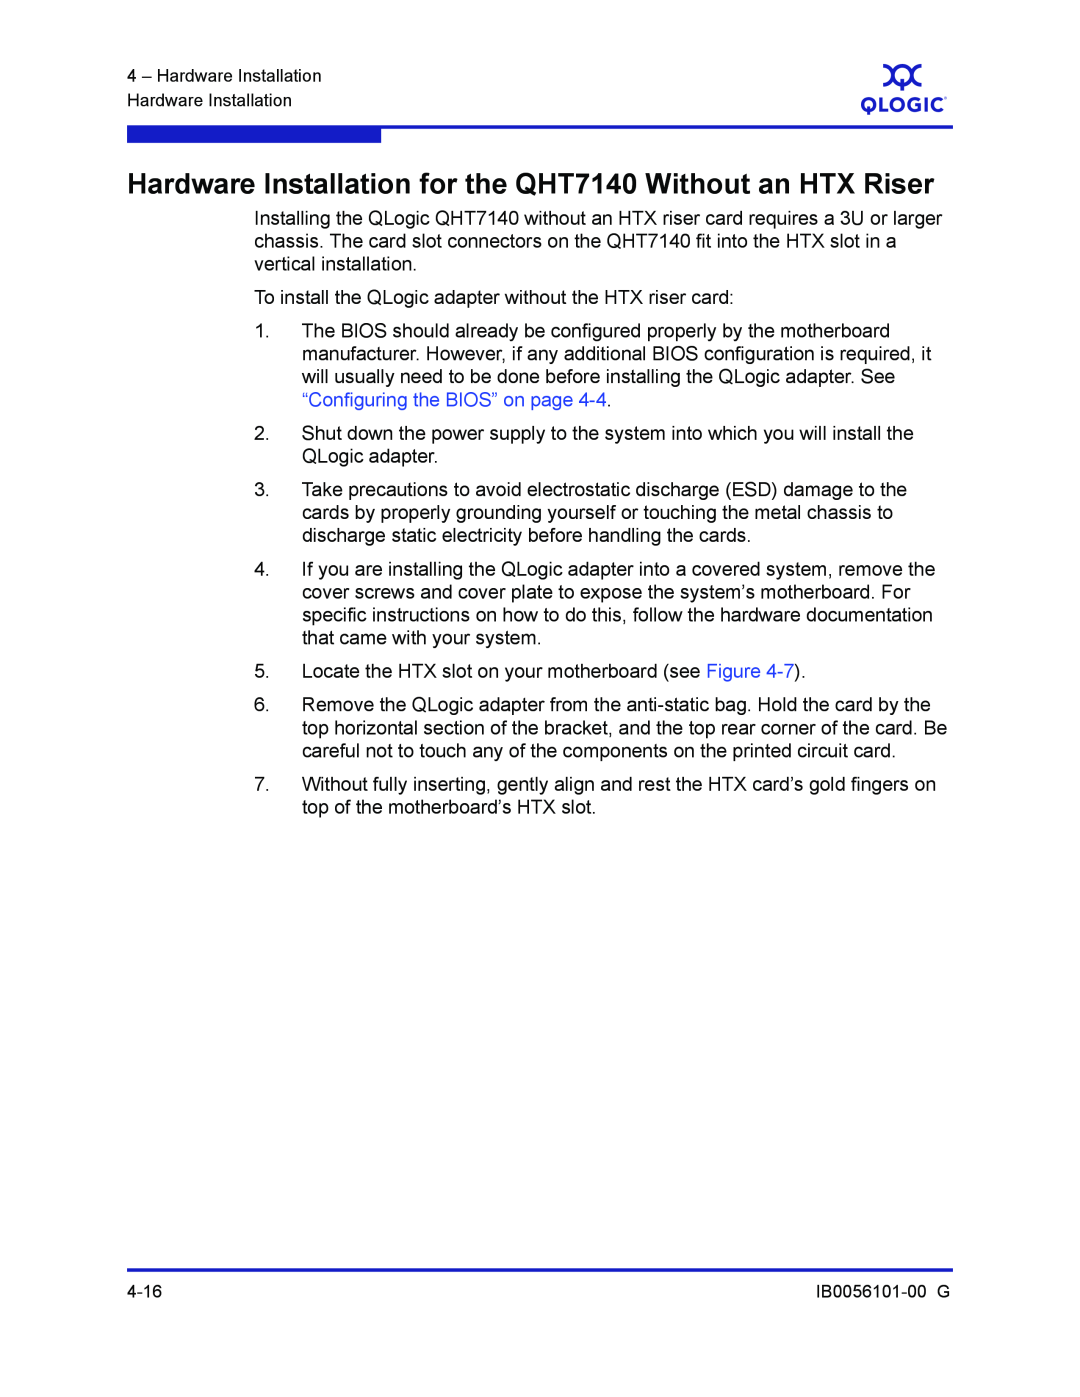 Q-Logic IB0056101-00 G manual Hardware Installation for the QHT7140 Without an HTX Riser 